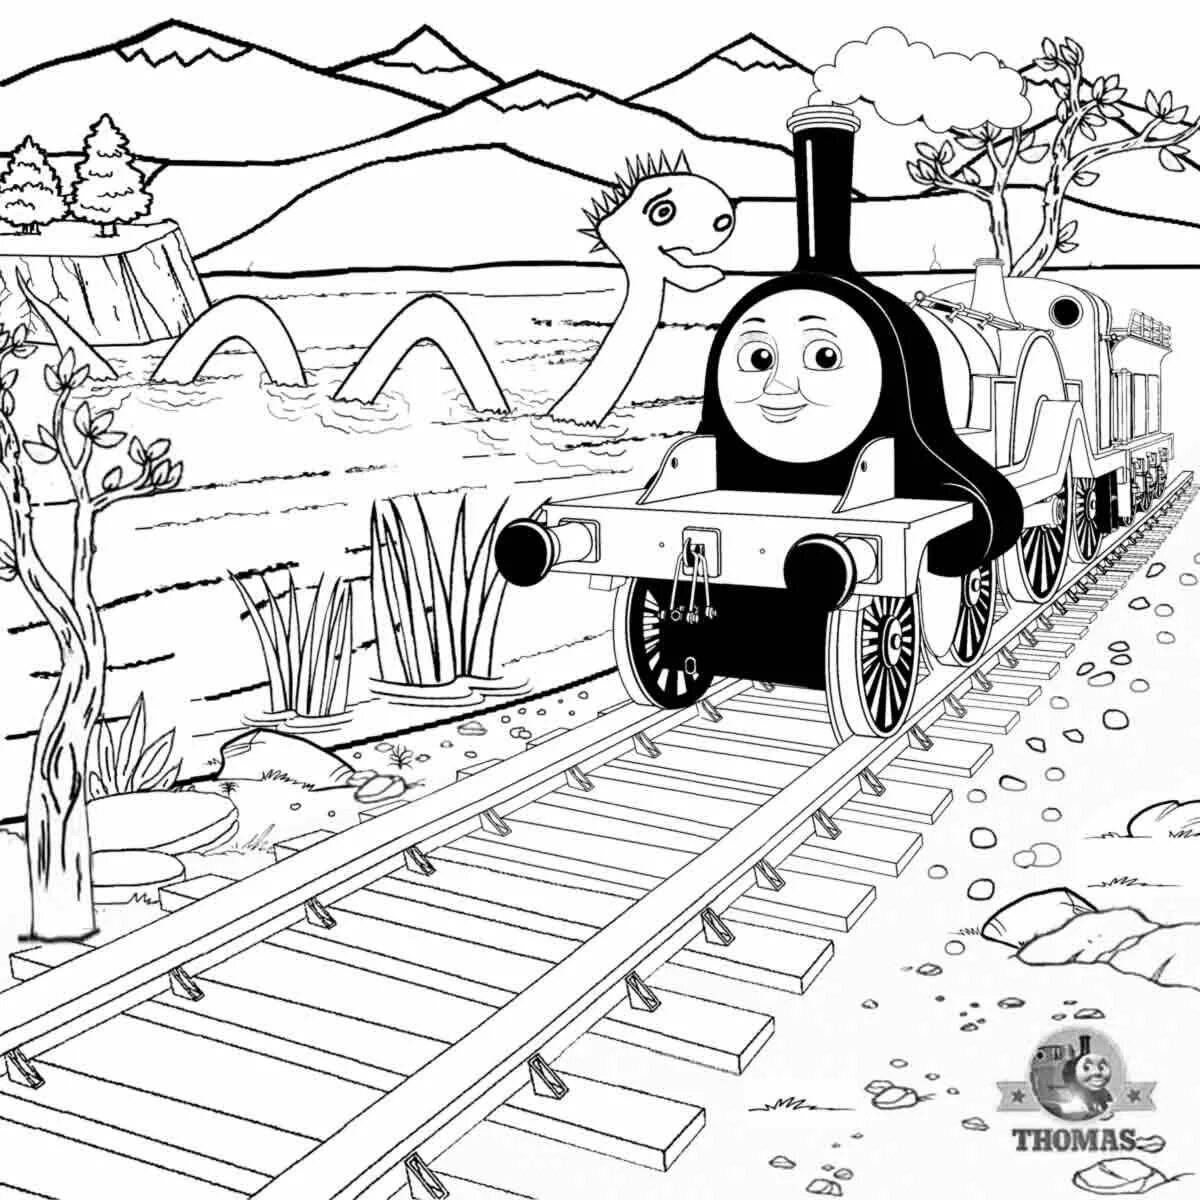 Thomas the Amazing Tank Engine: Scary Coloring Page